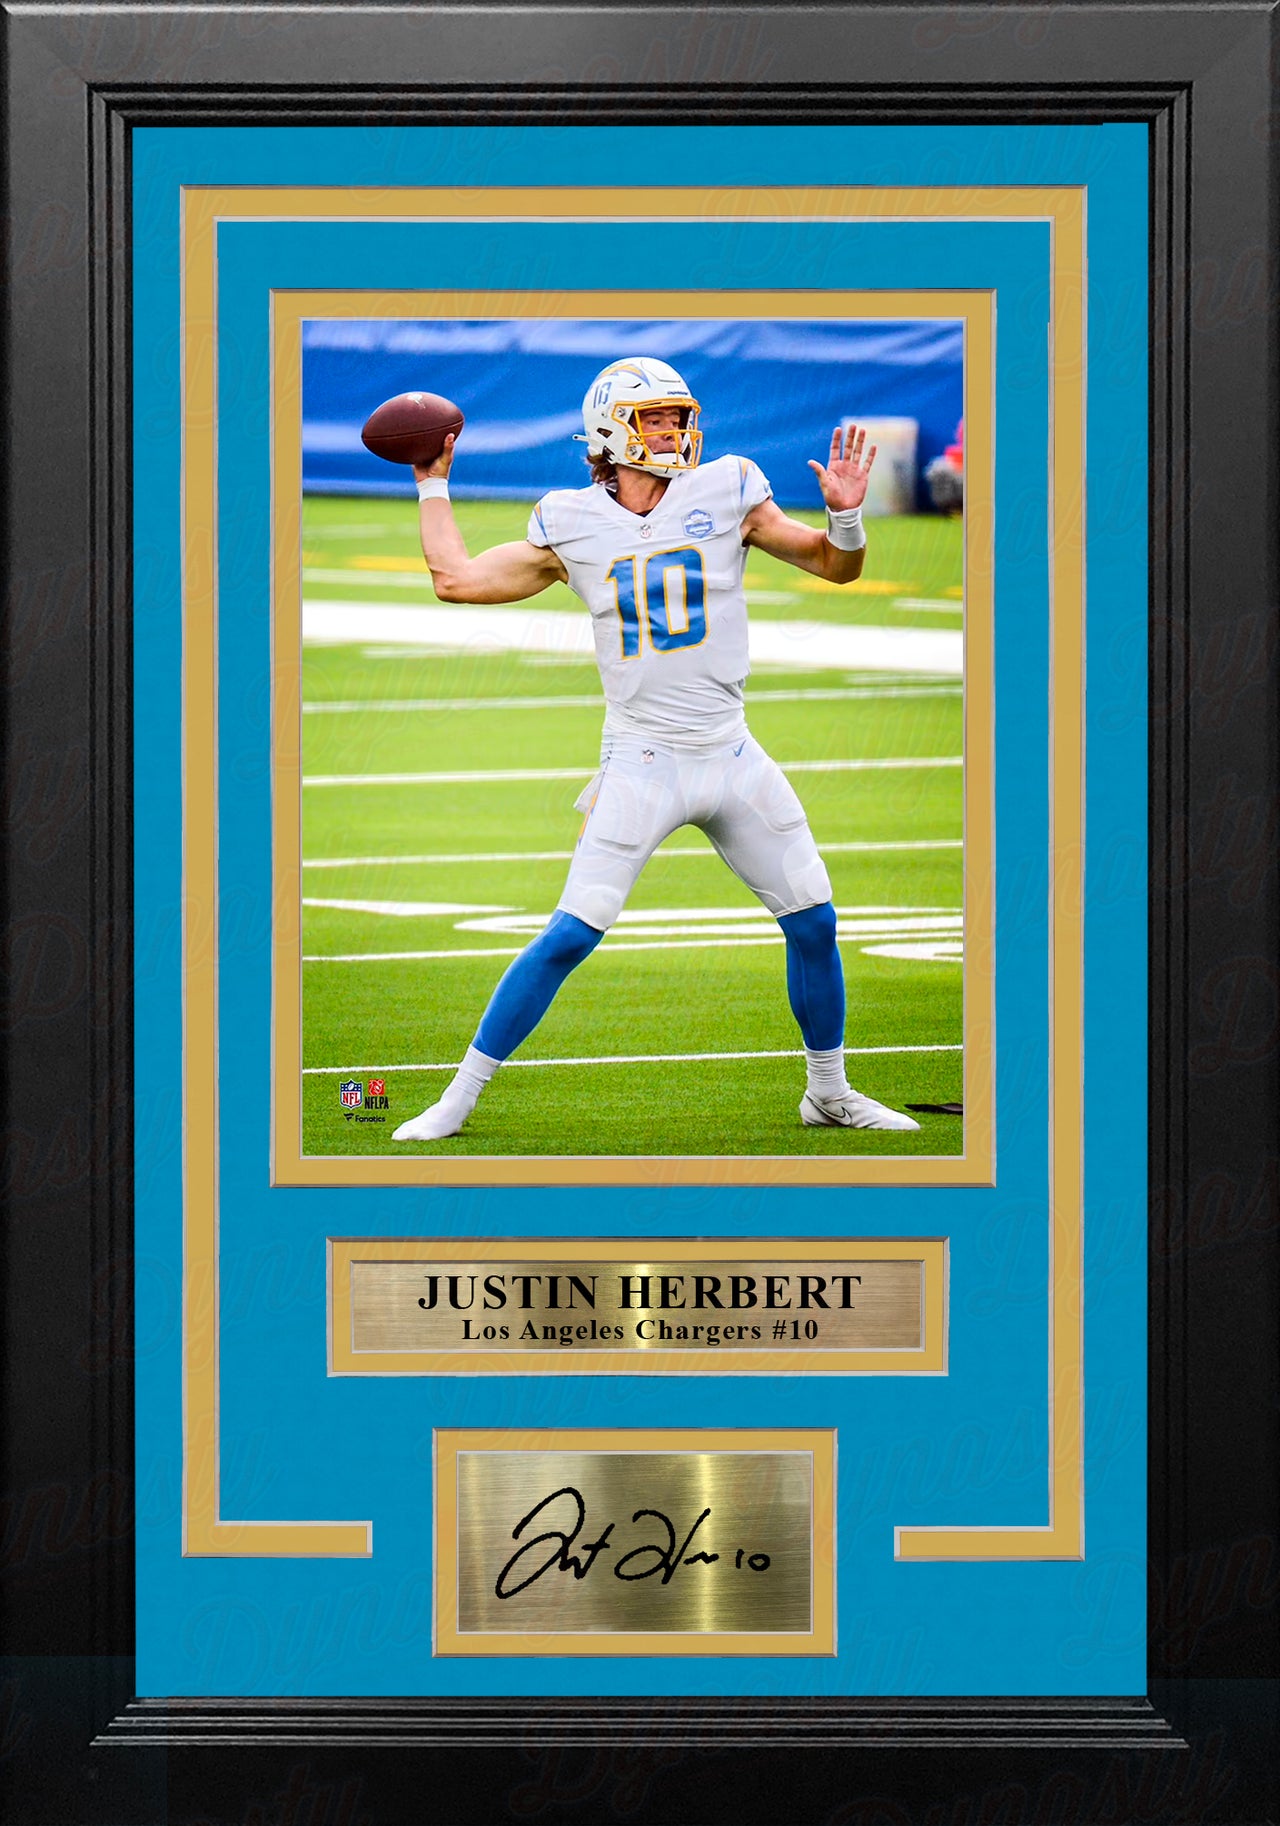 Justin Herbert in Action Los Angeles Chargers 8" x 10" Framed Football Photo with Engraved Autograph